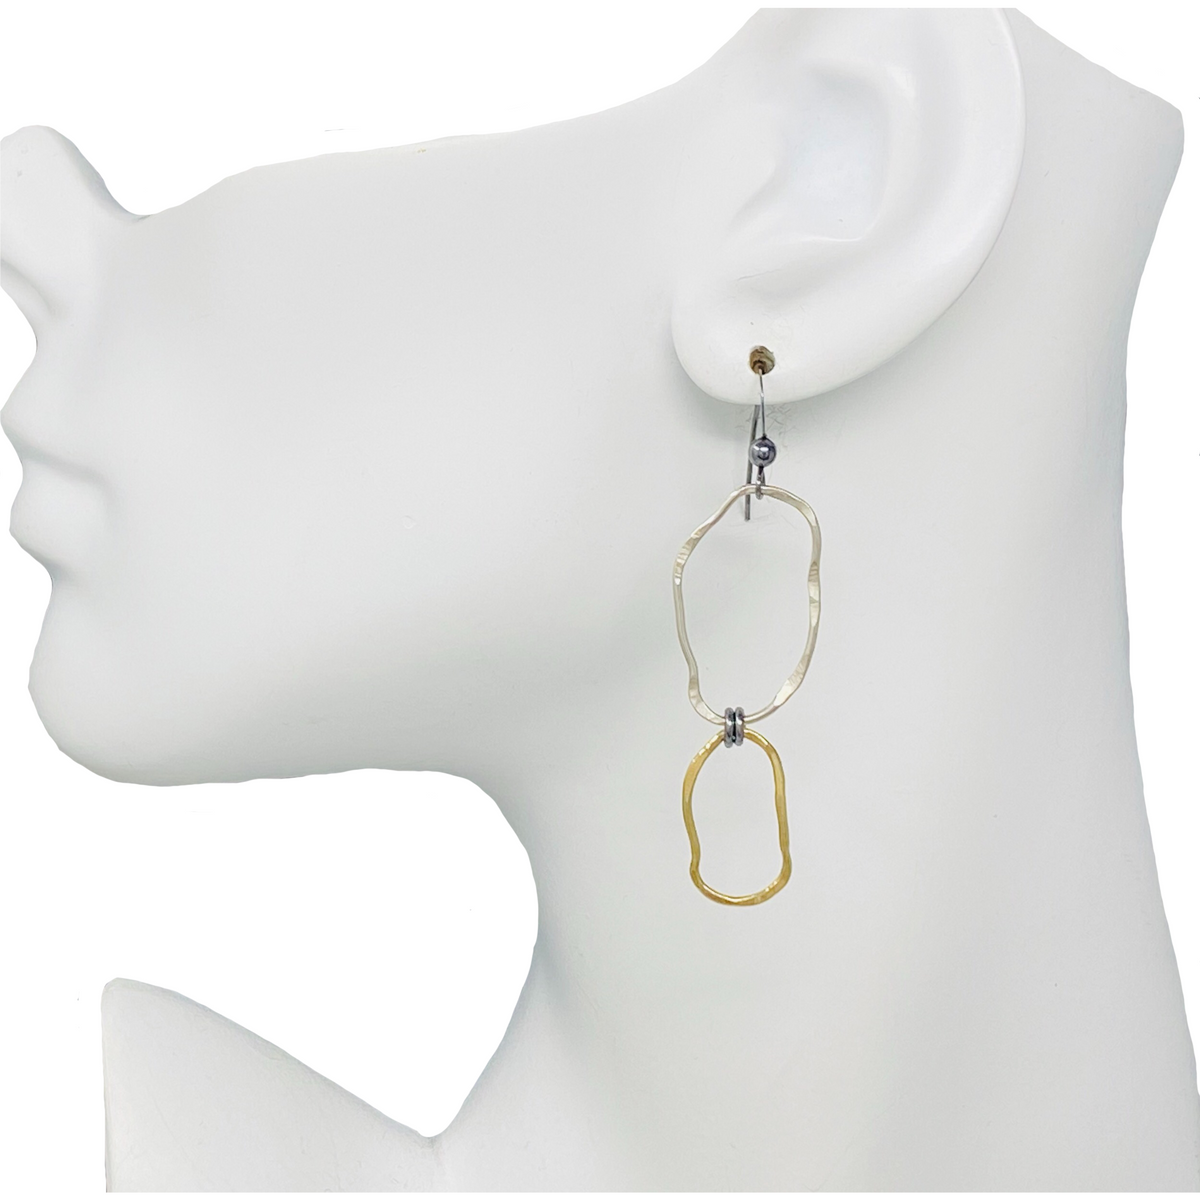 Reflection Earrings - Susan Rodgers Designs